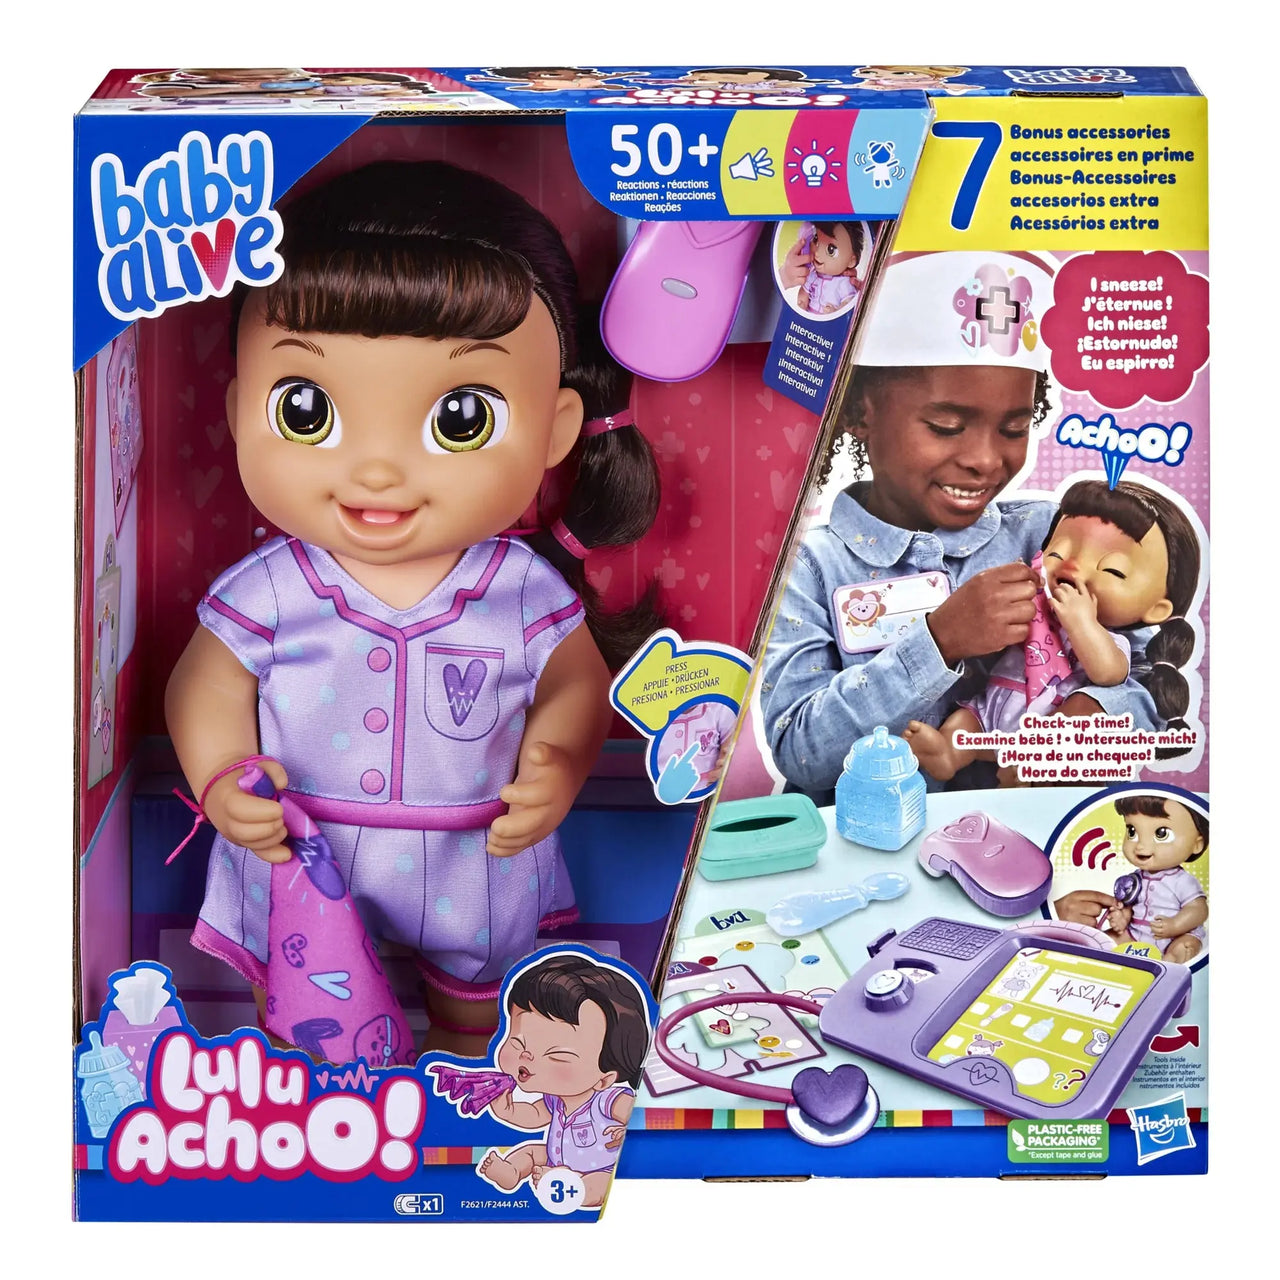 Baby Alive Lulu Achoo Doll, 12-Inch Interactive Doctor Play Toy Master Kids Company Baby Alive 